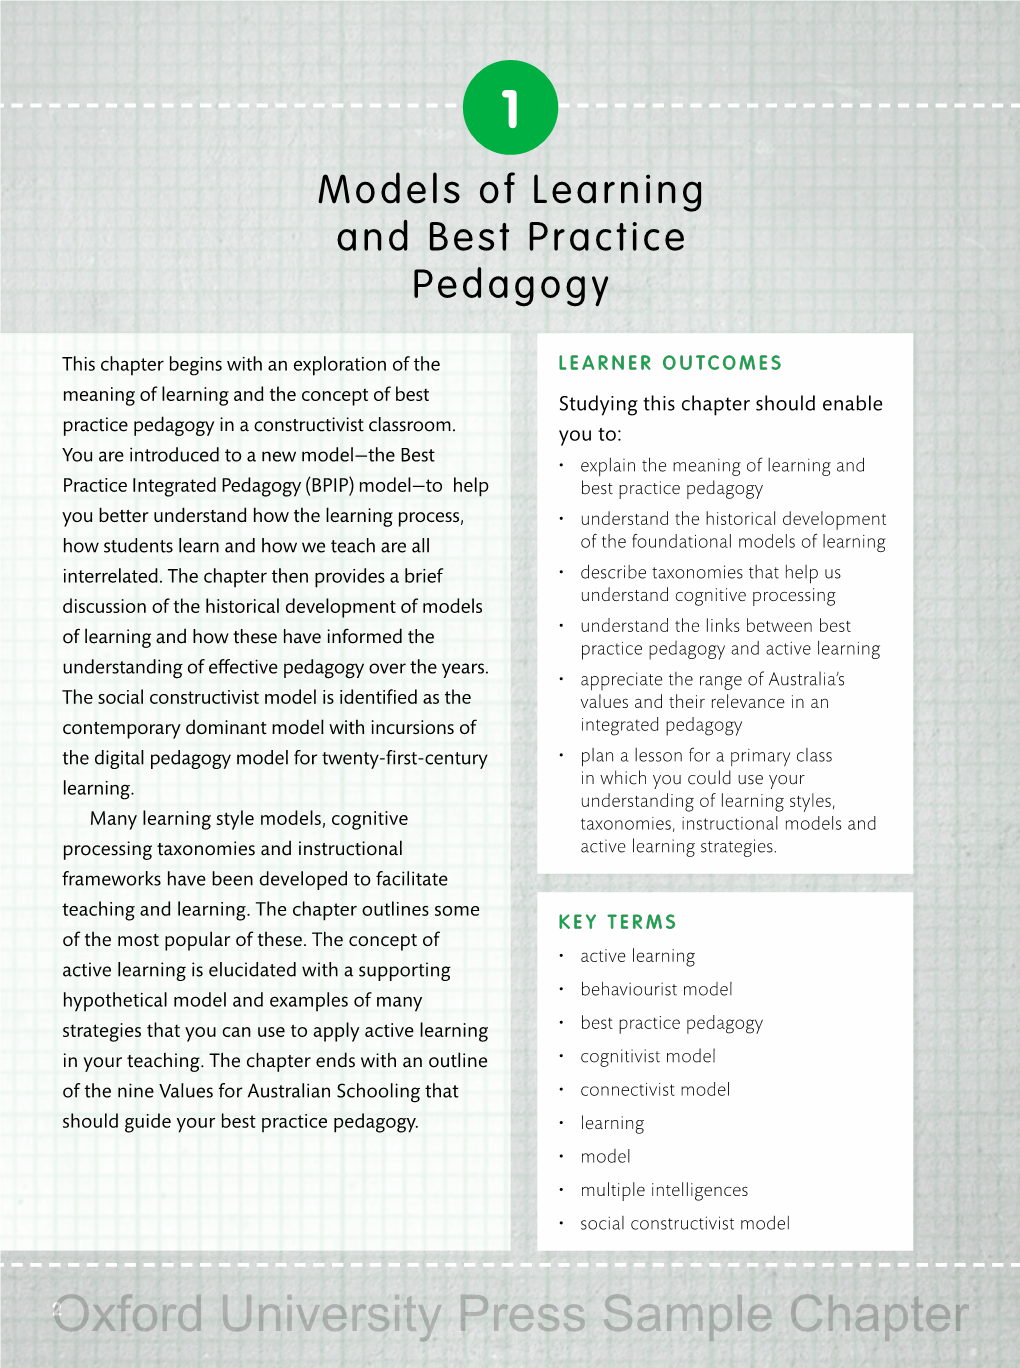 Models of Learning and Best Practice Pedagogy